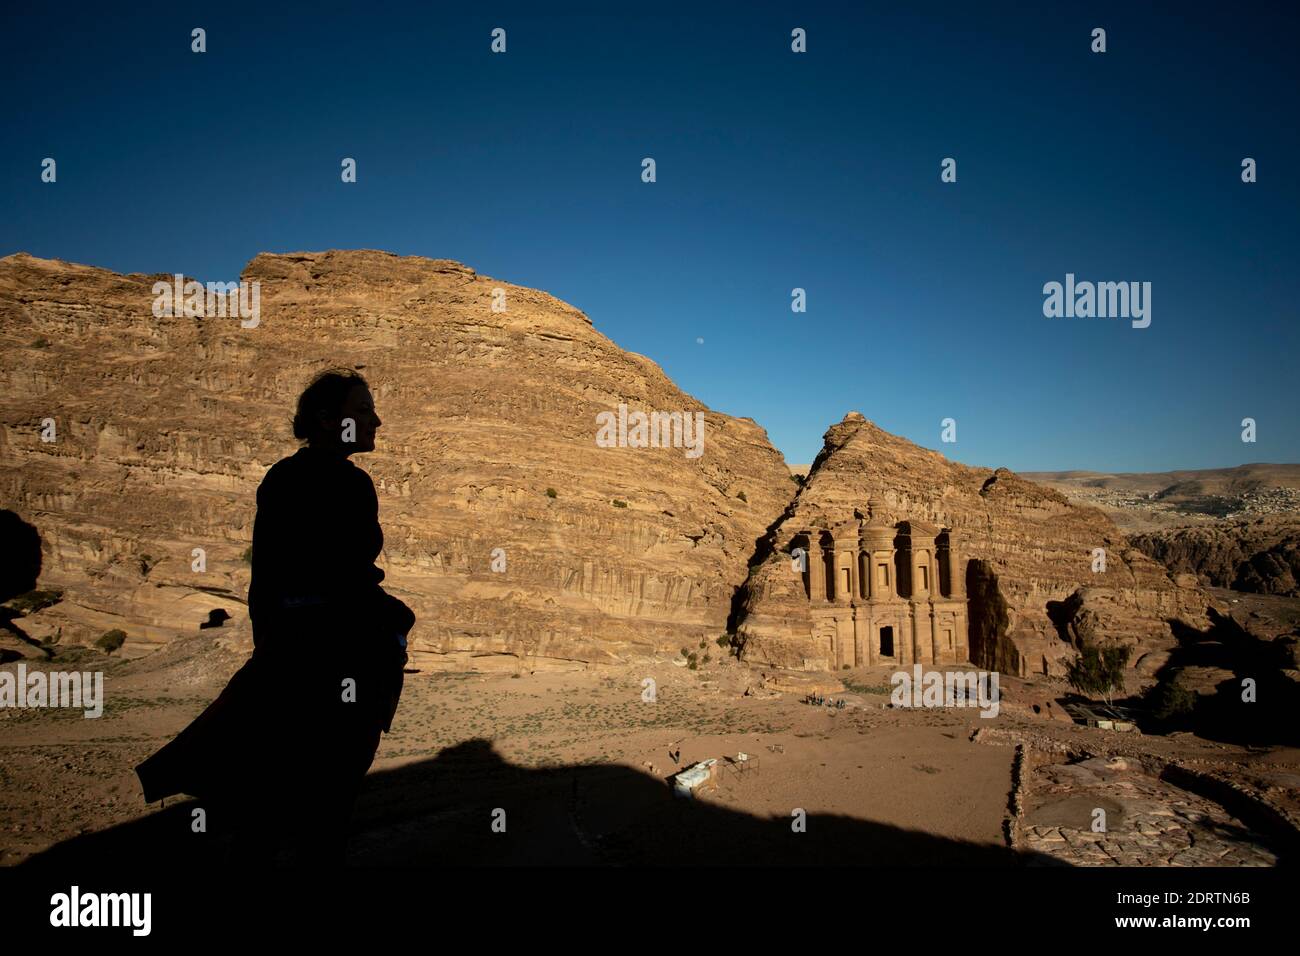 Turist in Wadi Musa, Petra archeological site, just a few weeks  before the global lockdown due to the pandemic Stock Photo